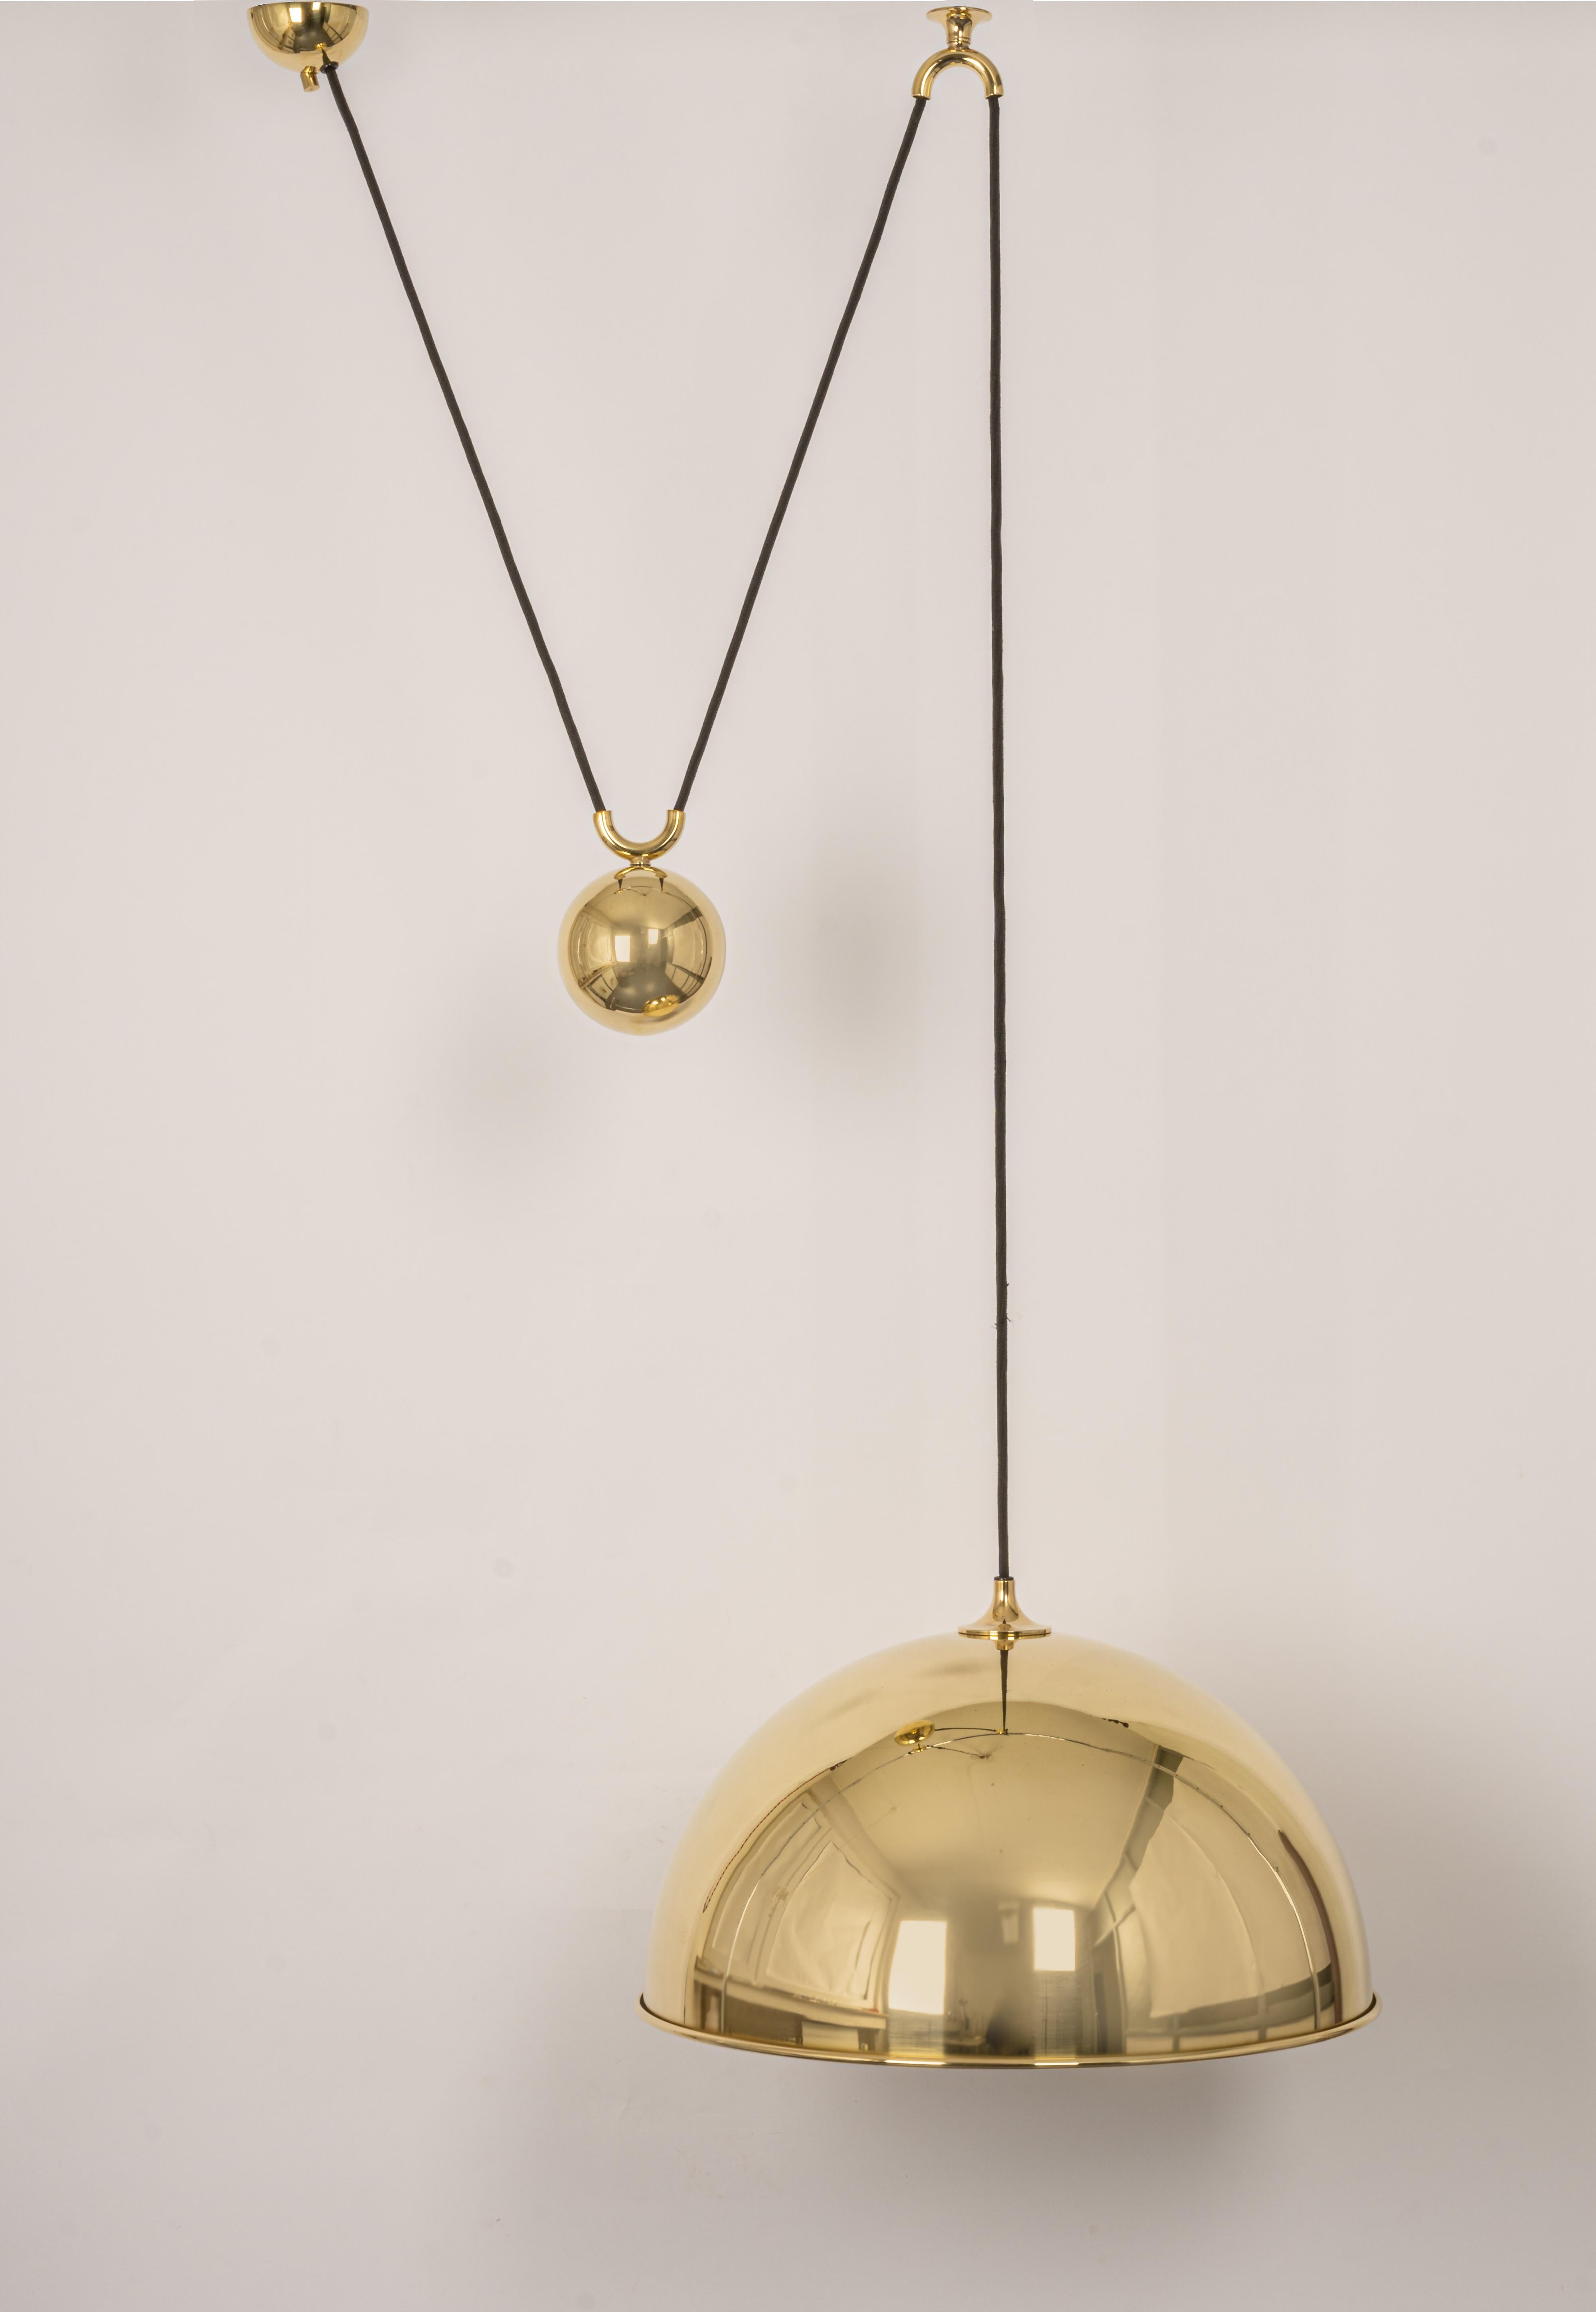 Stunning Posa brass pendant with adjustable counterweight designed by Florian Schulz, Germany, 1970s

One heavy metal ball counter-weight and one brass dome. Cloth cord.
Good vintage condition, with small signs of age and use. Height is